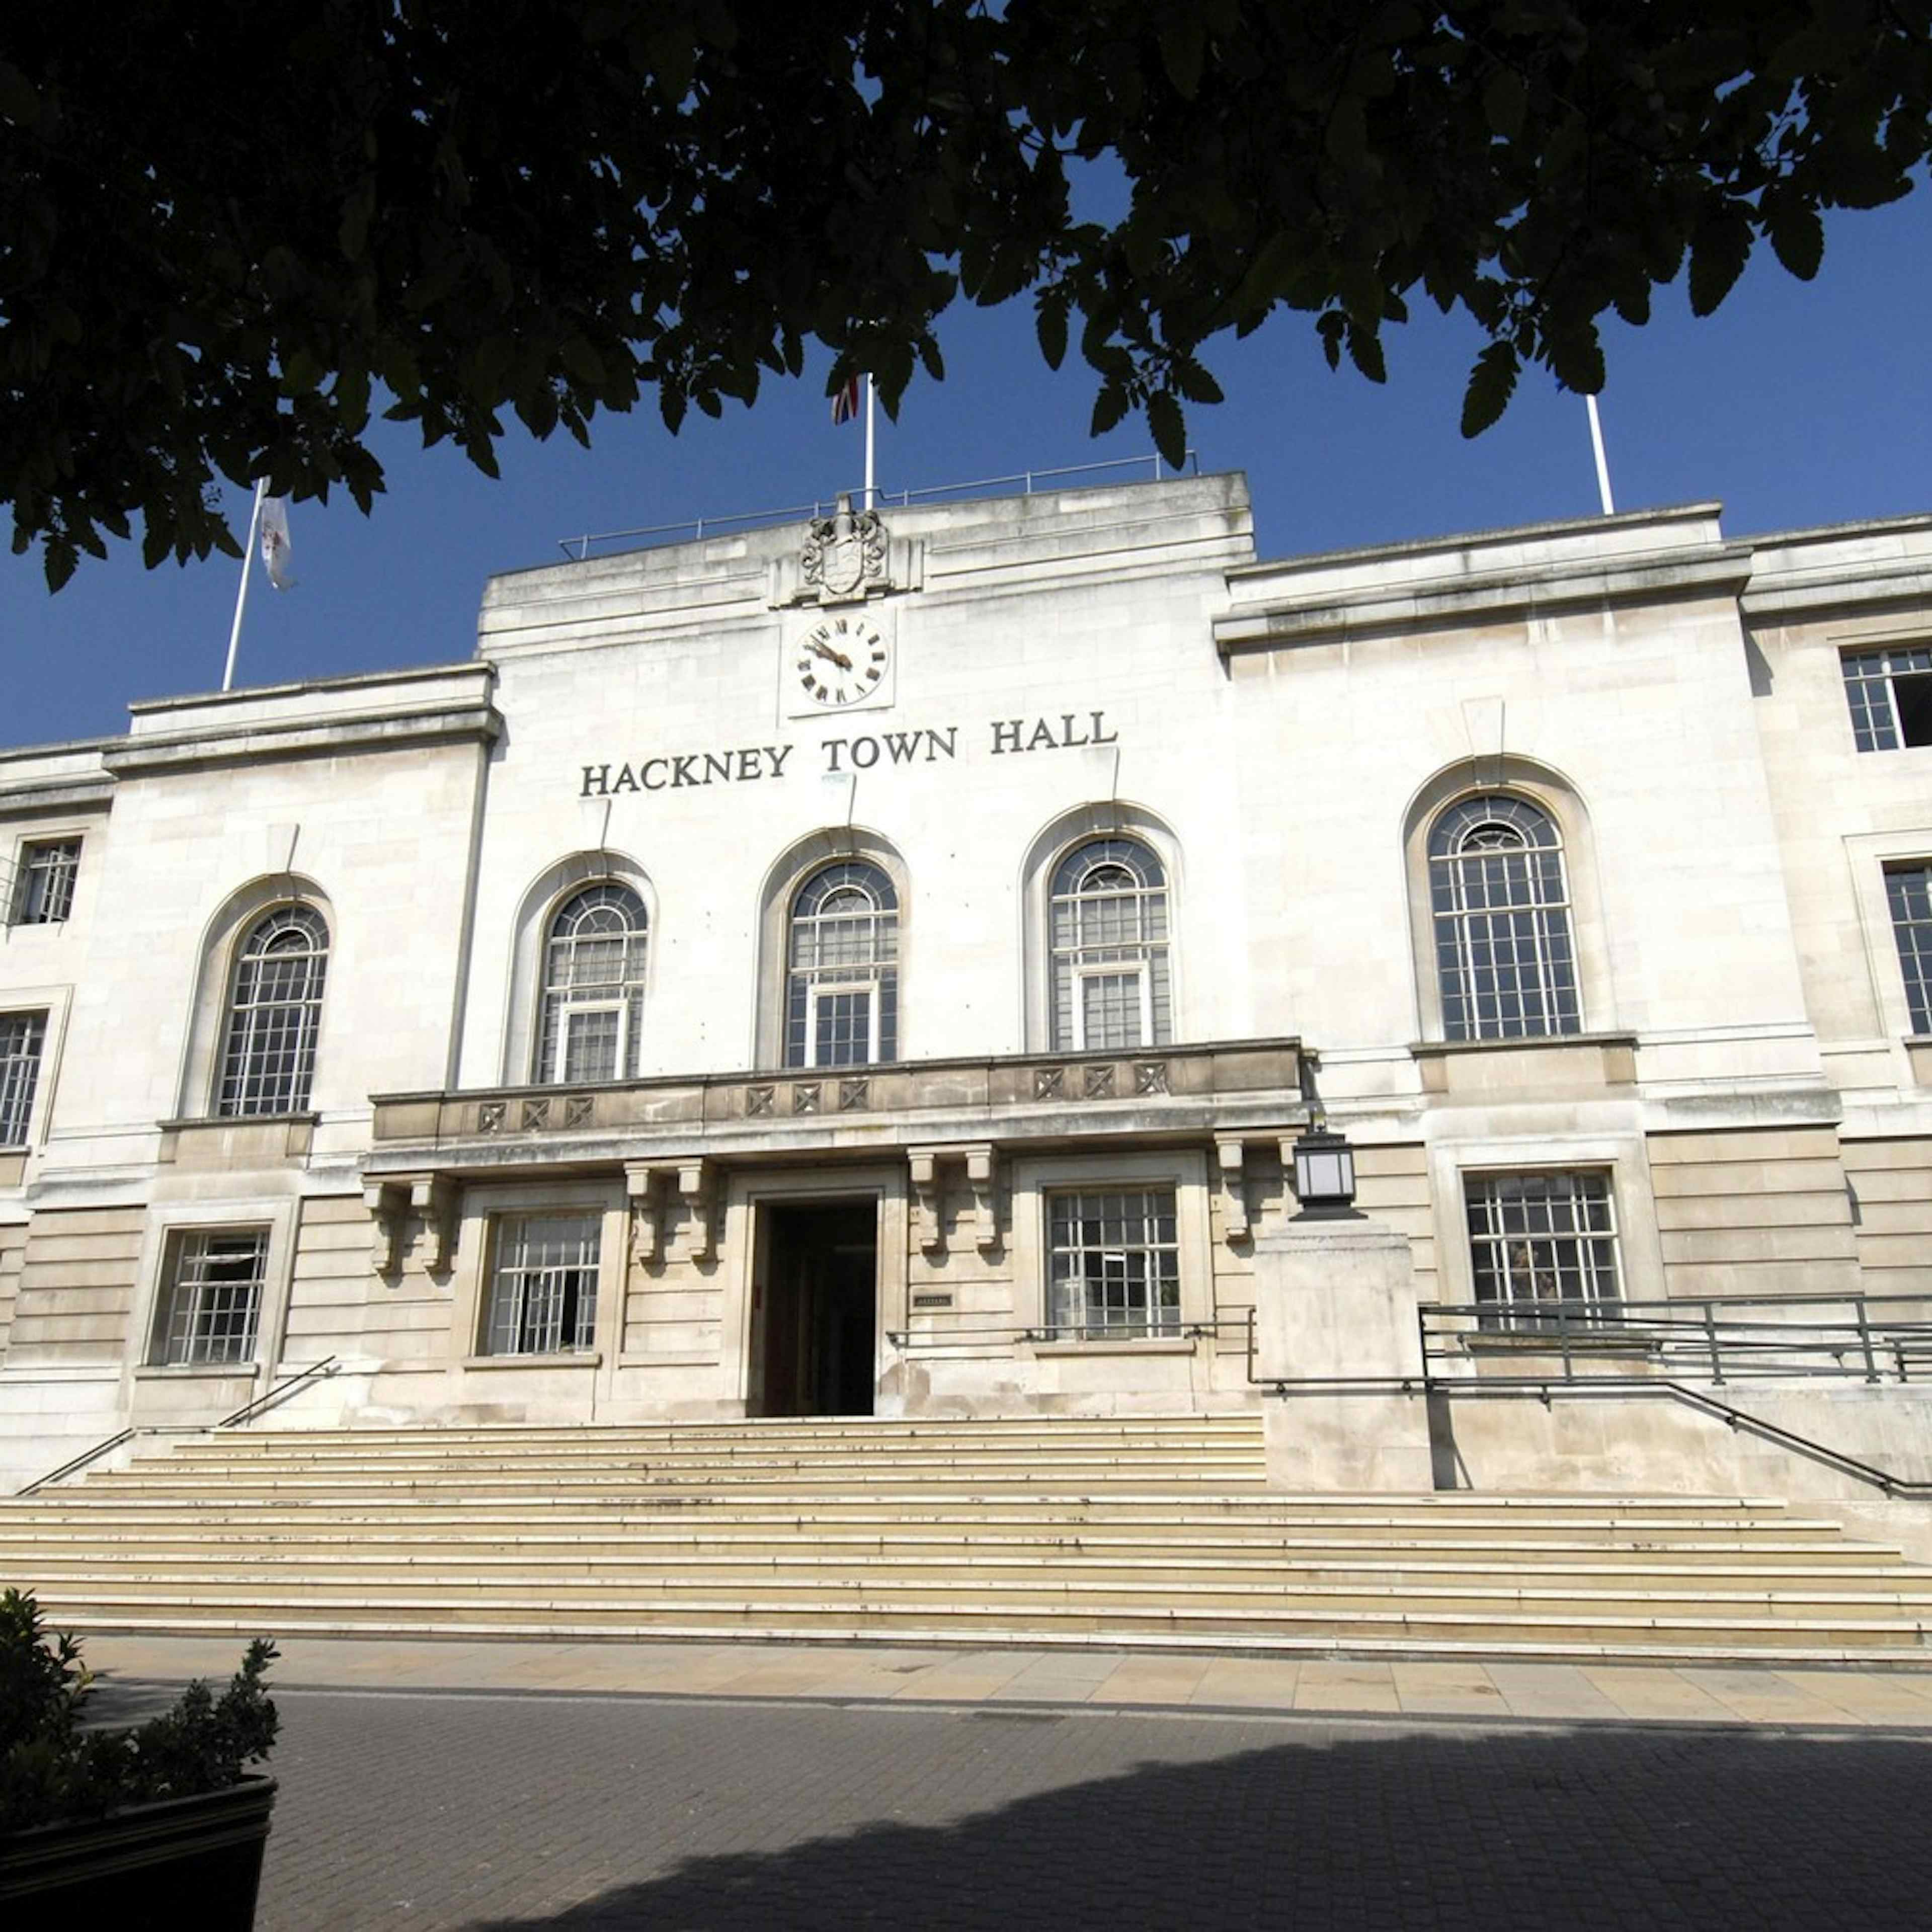 Hackney Town Hall - image 3